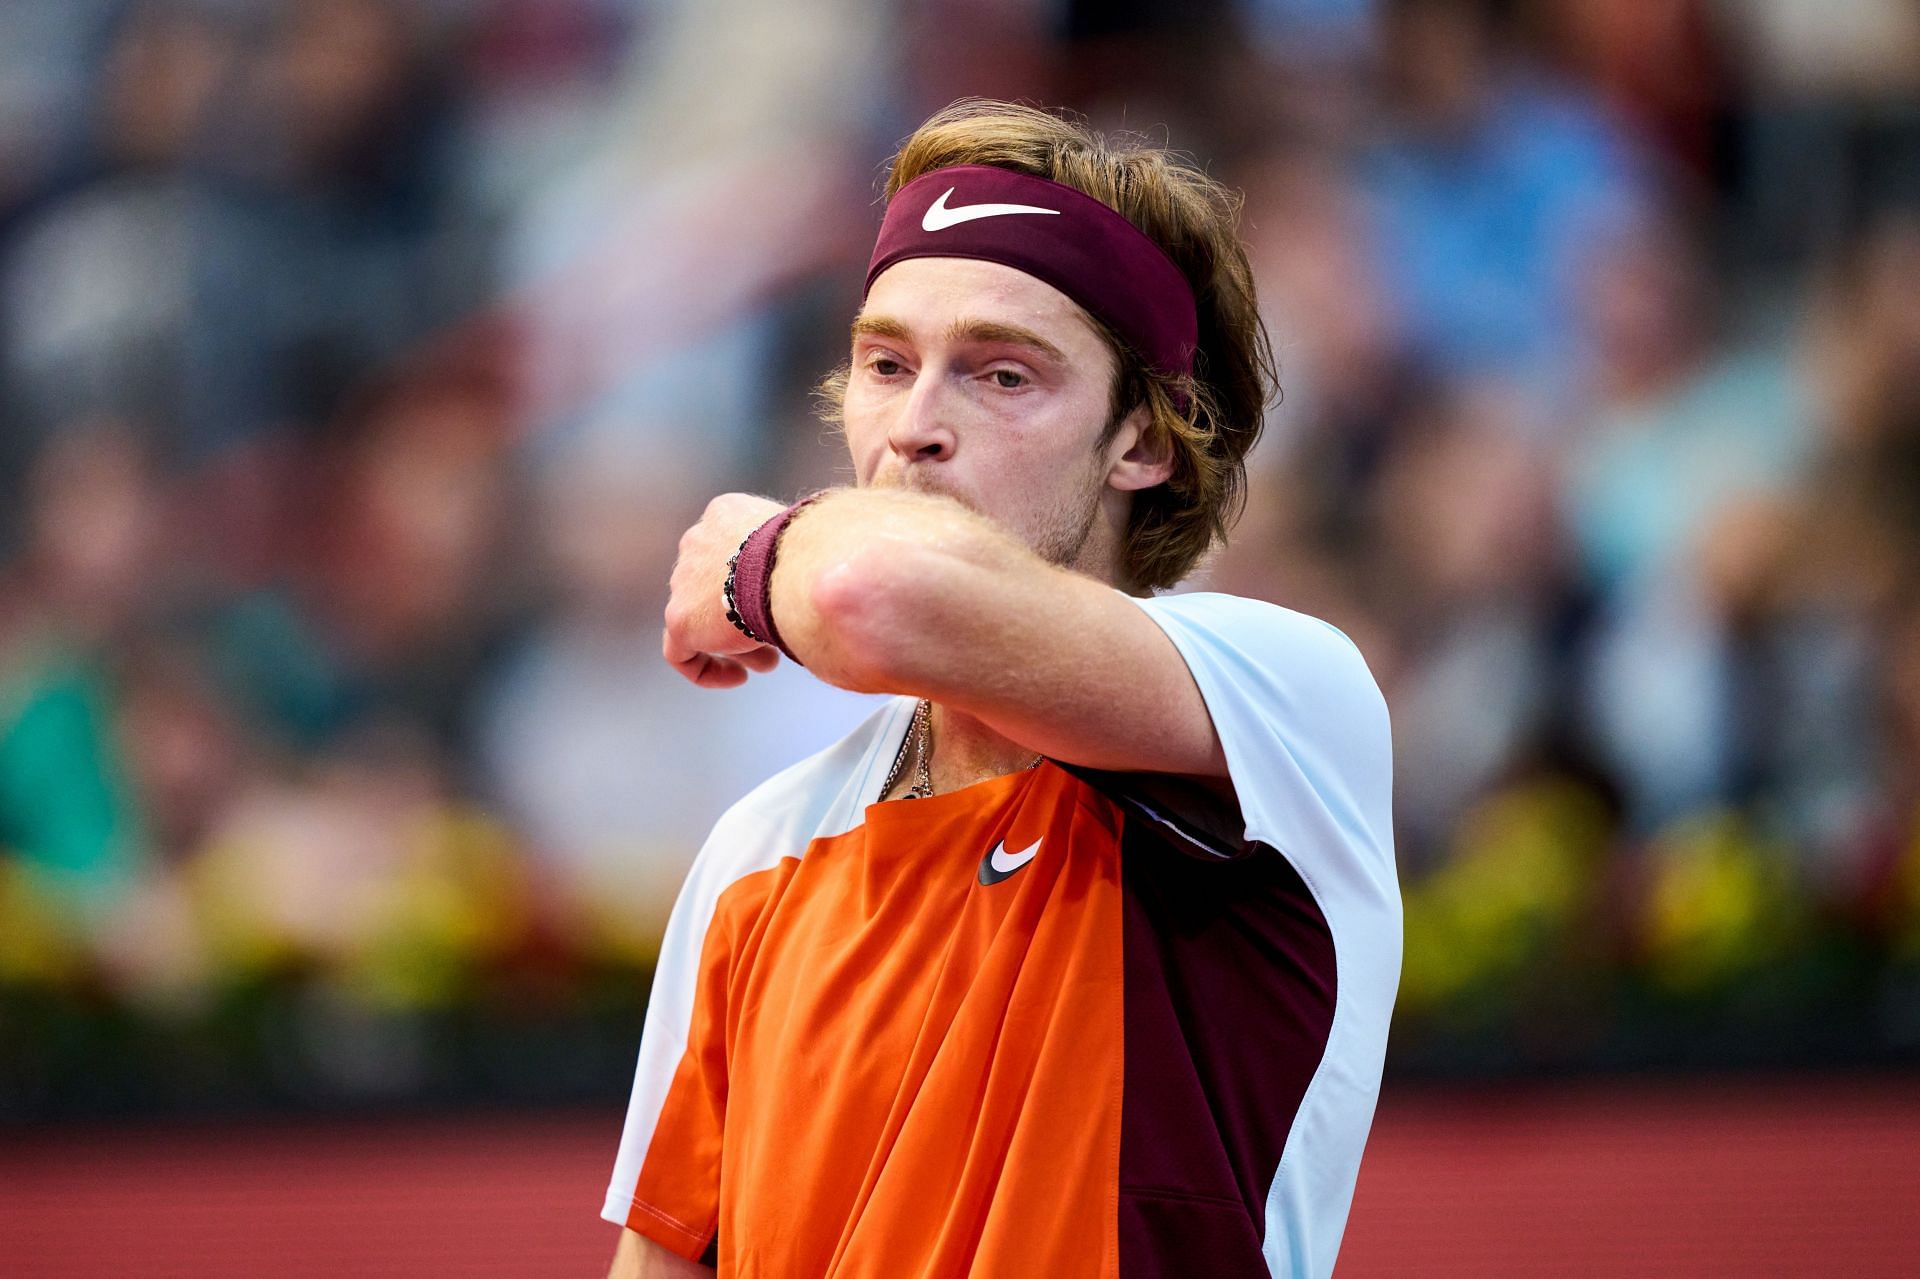 Andrey Rublev at the Gijon Open